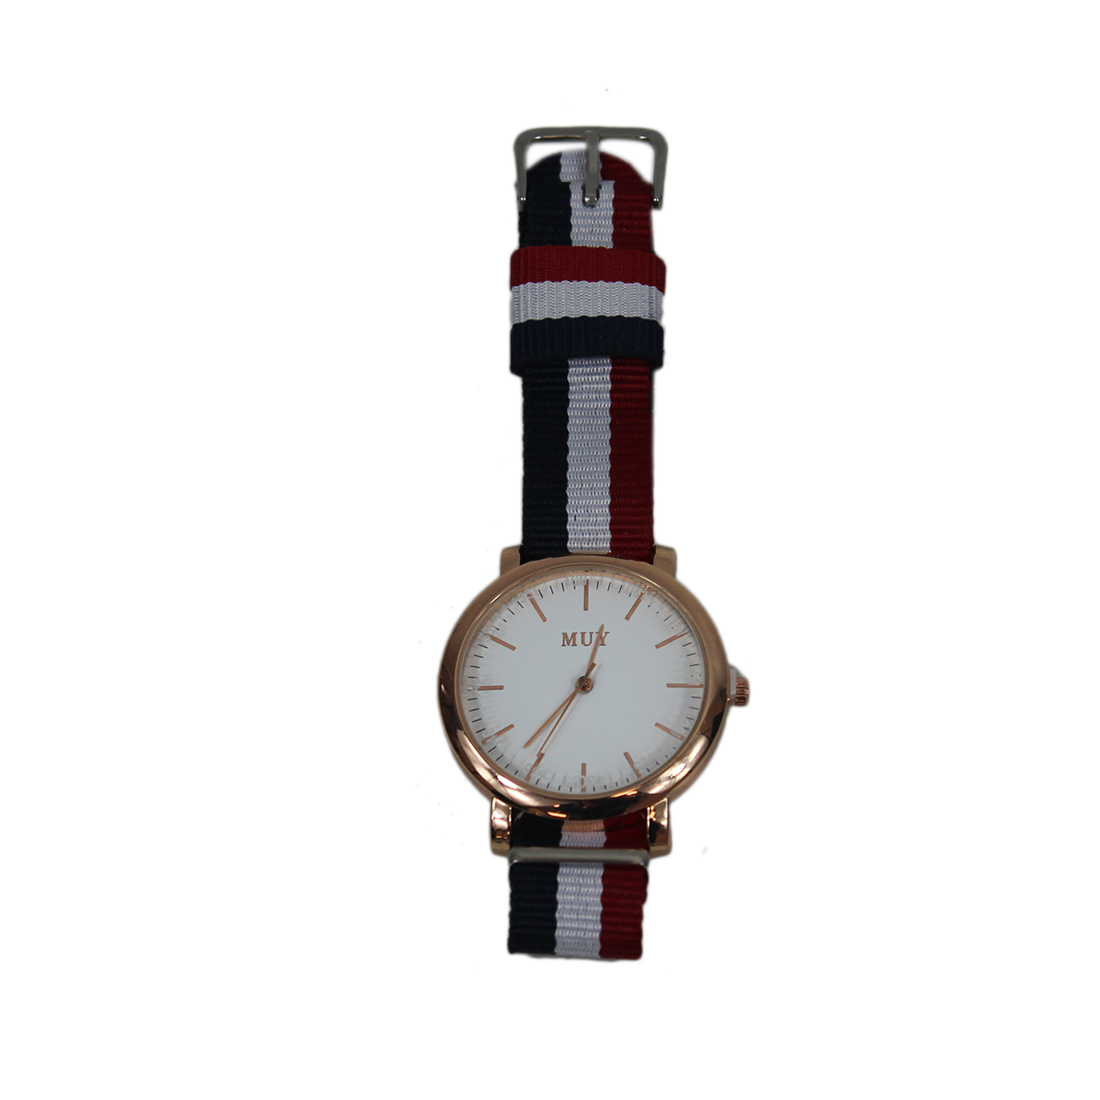 Colour Strap with gold face